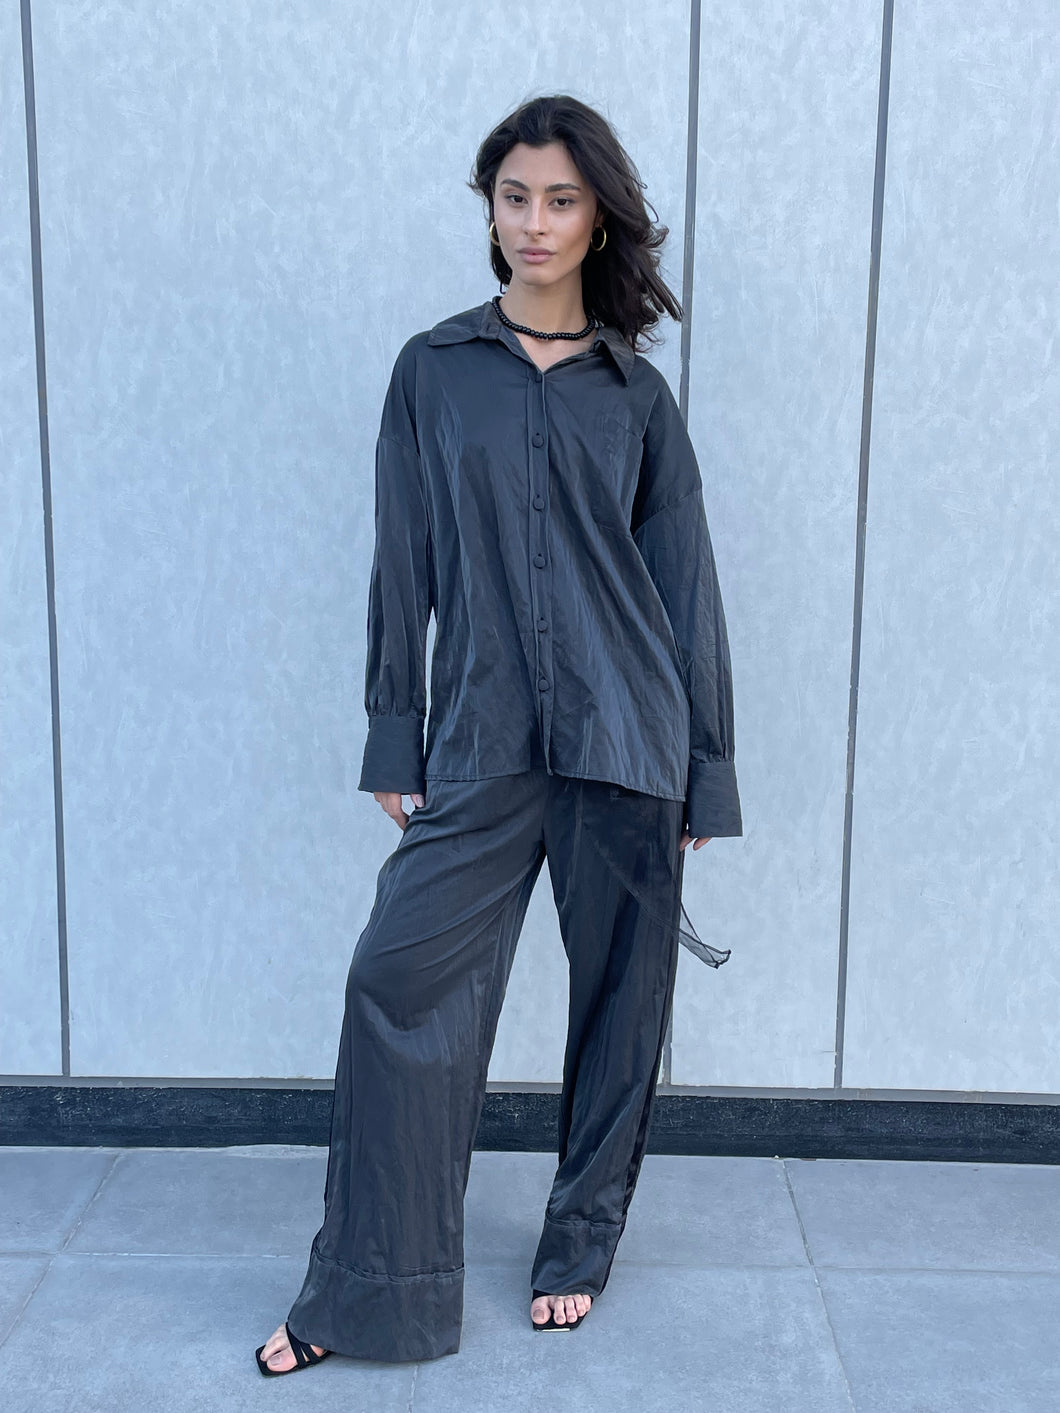 Shimmer woven leather pajama set